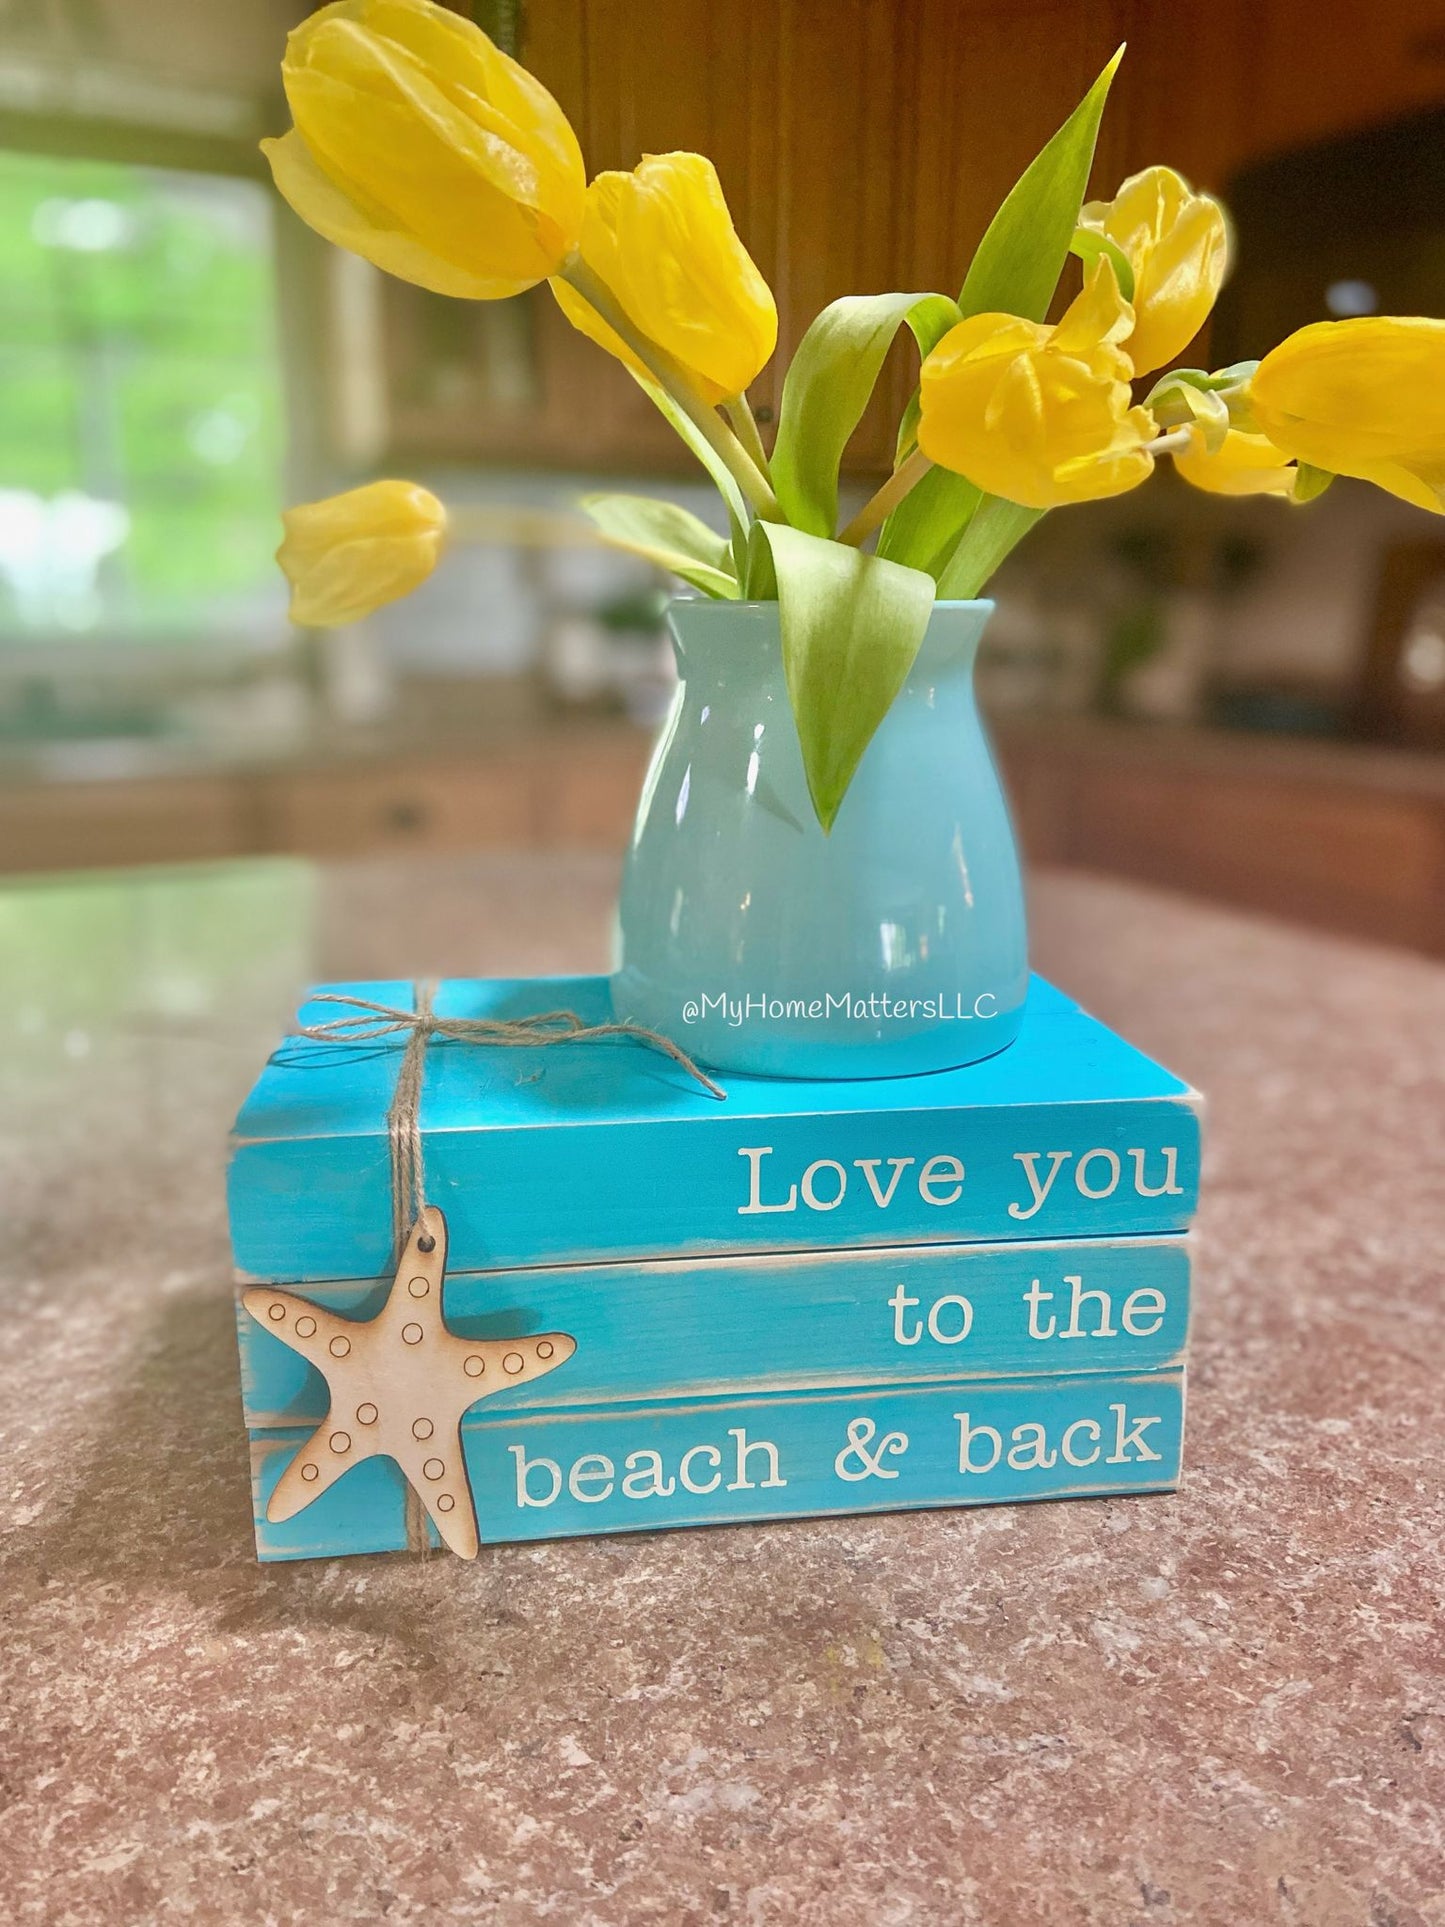 DIY Wooden Books - Love You to the Beach & Back